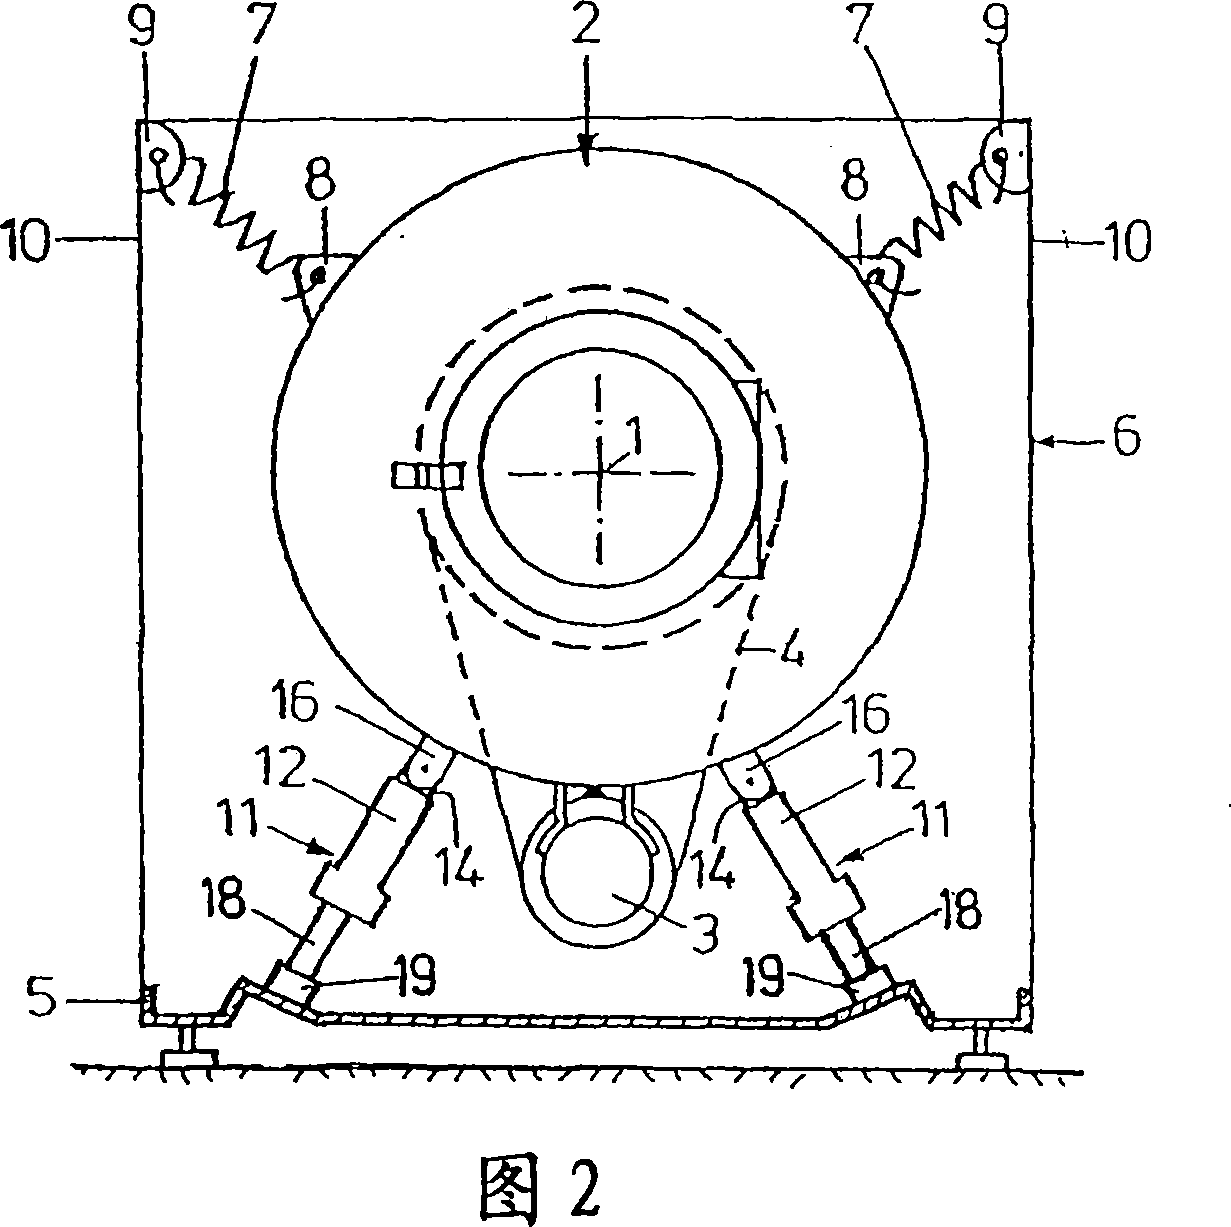 Connecting device for connecting of vibration damper to washing machine and/or frame of washing machine